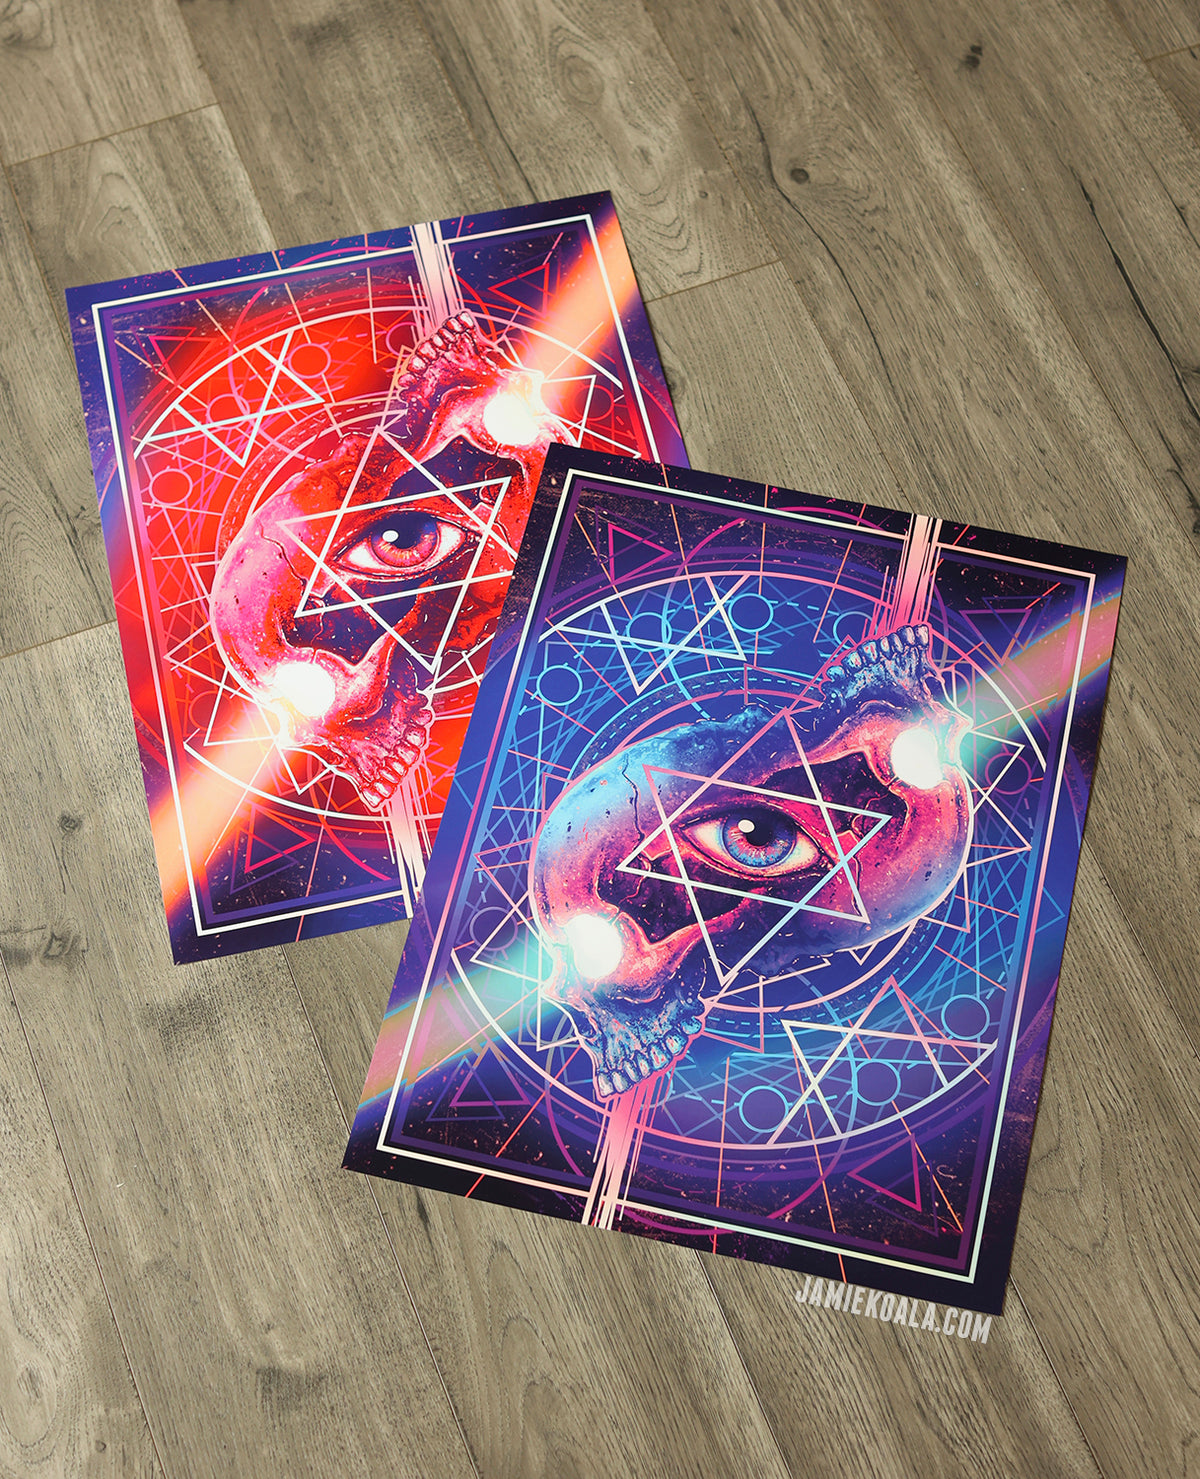 LIMITED EDITION Divergence Print Eclipse Merkaba Variant